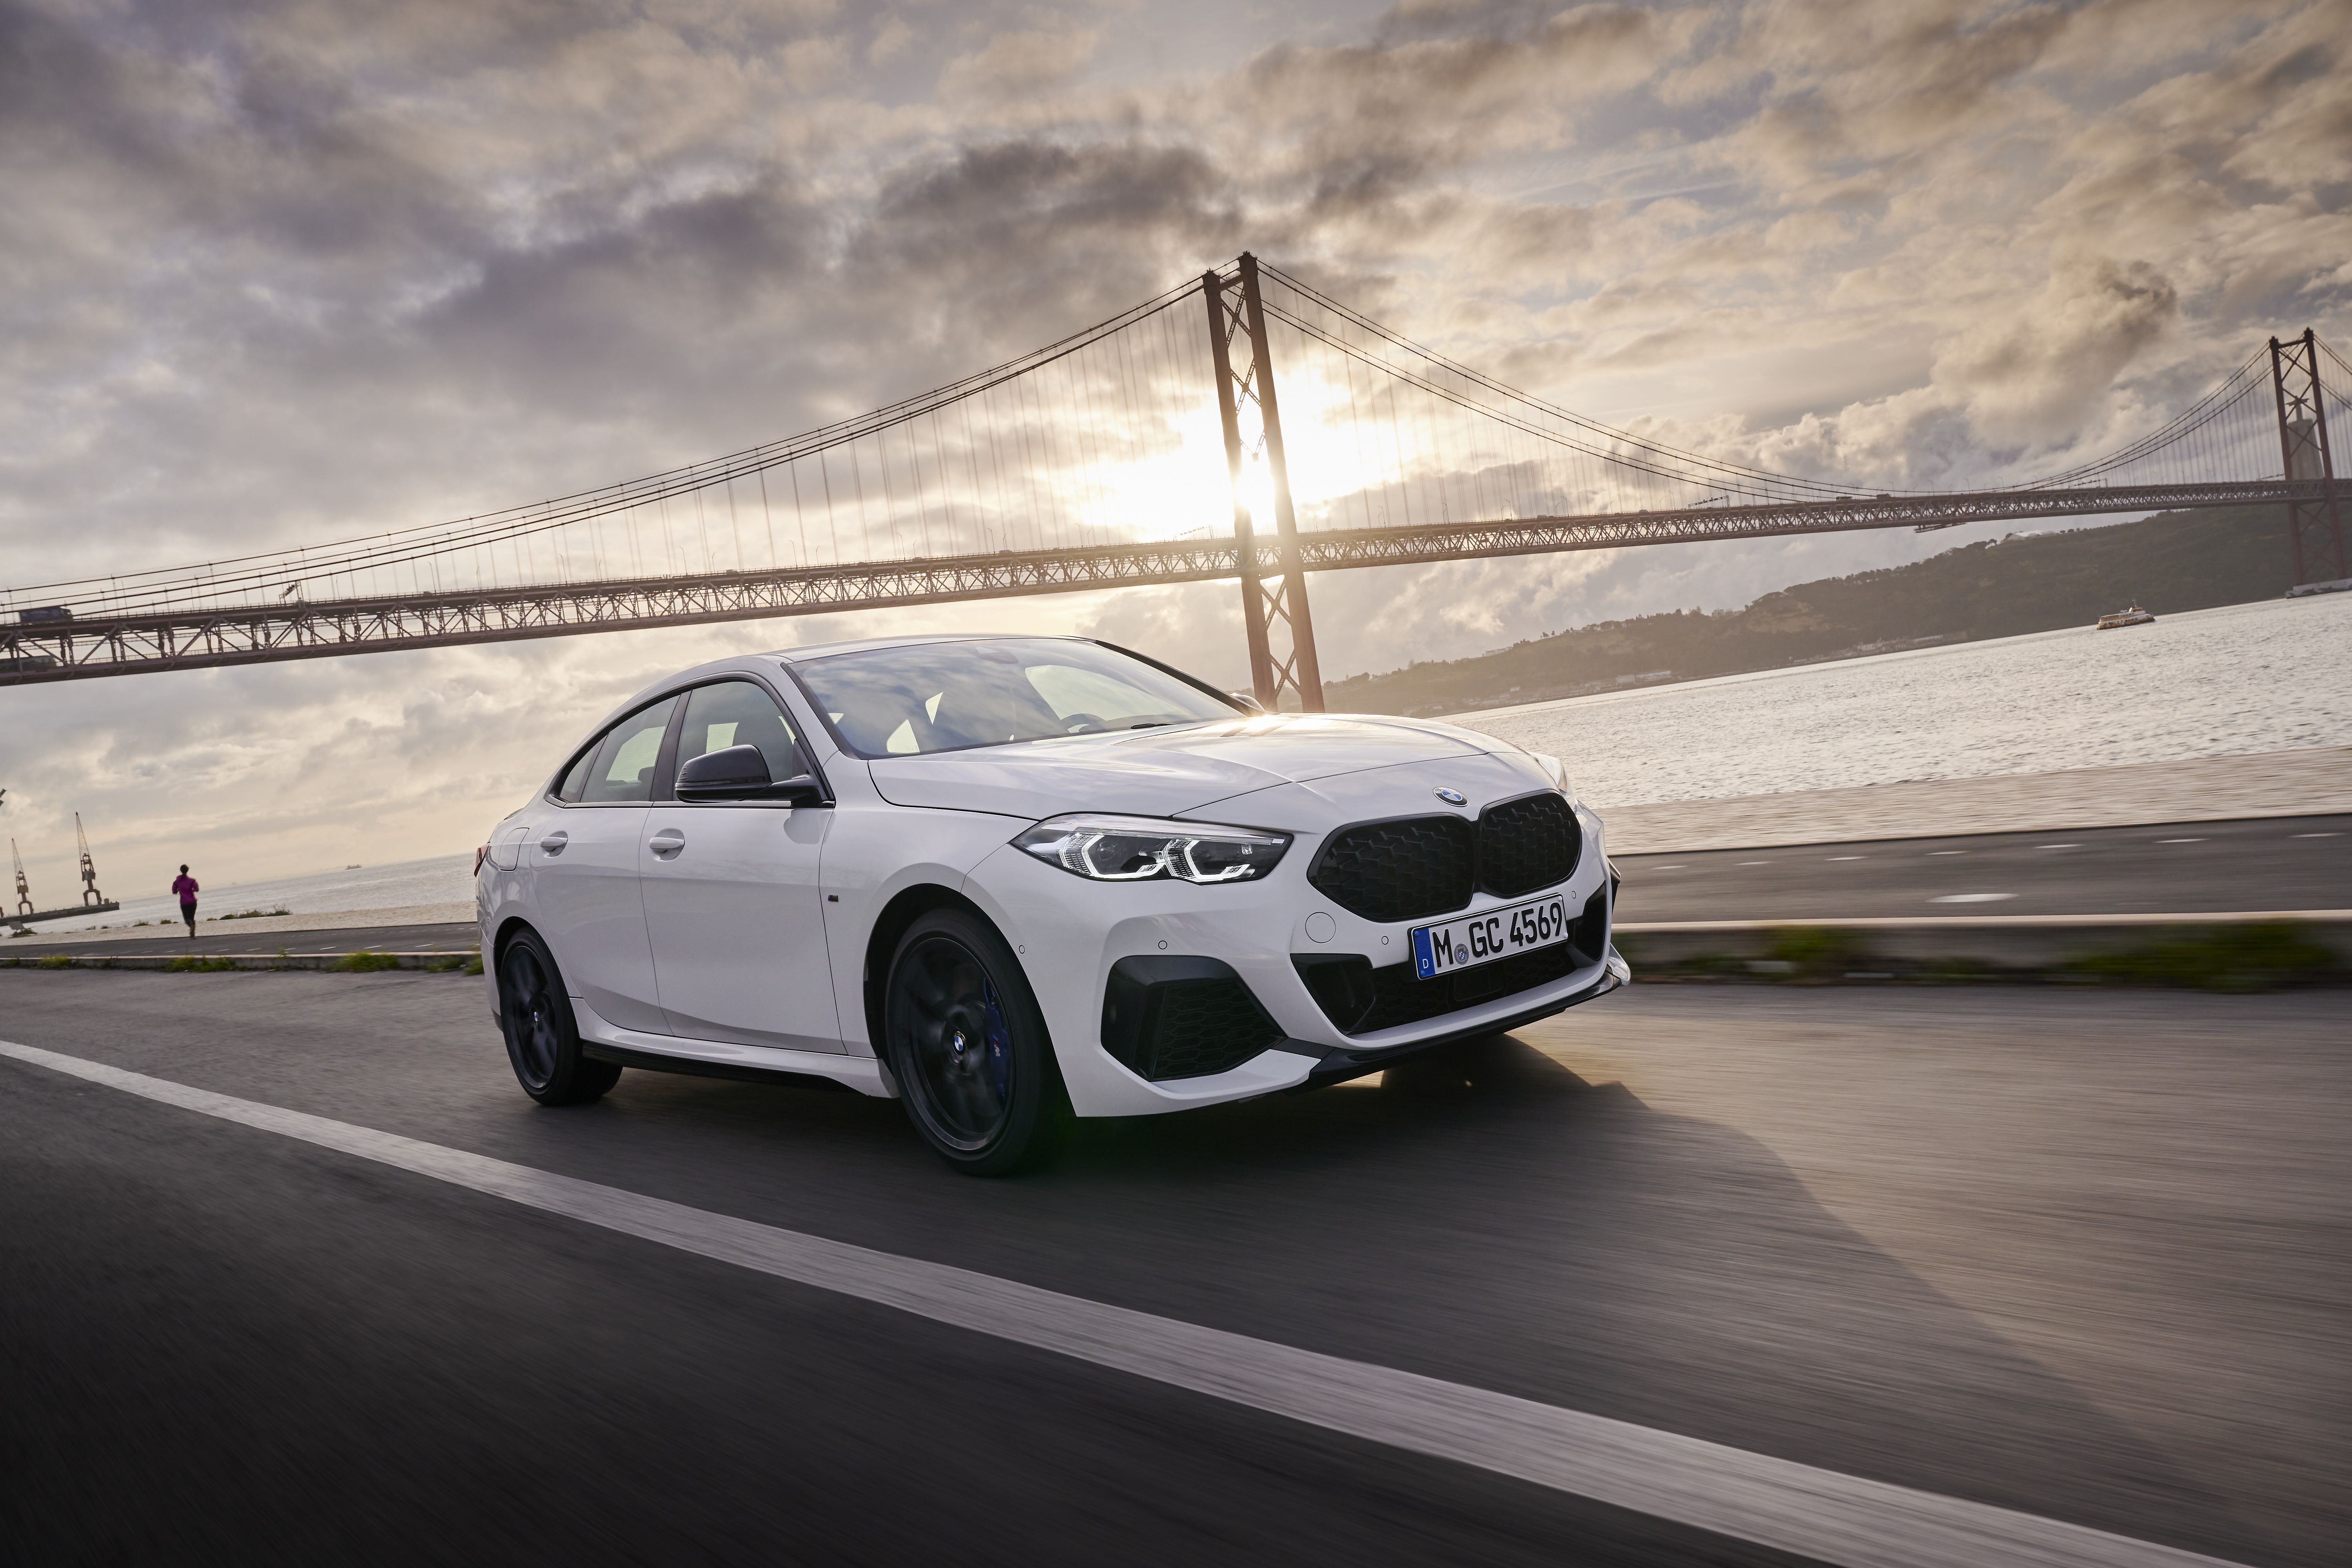 First Drive: The BMW M235i Gran Coupe is practical and pacey | Express